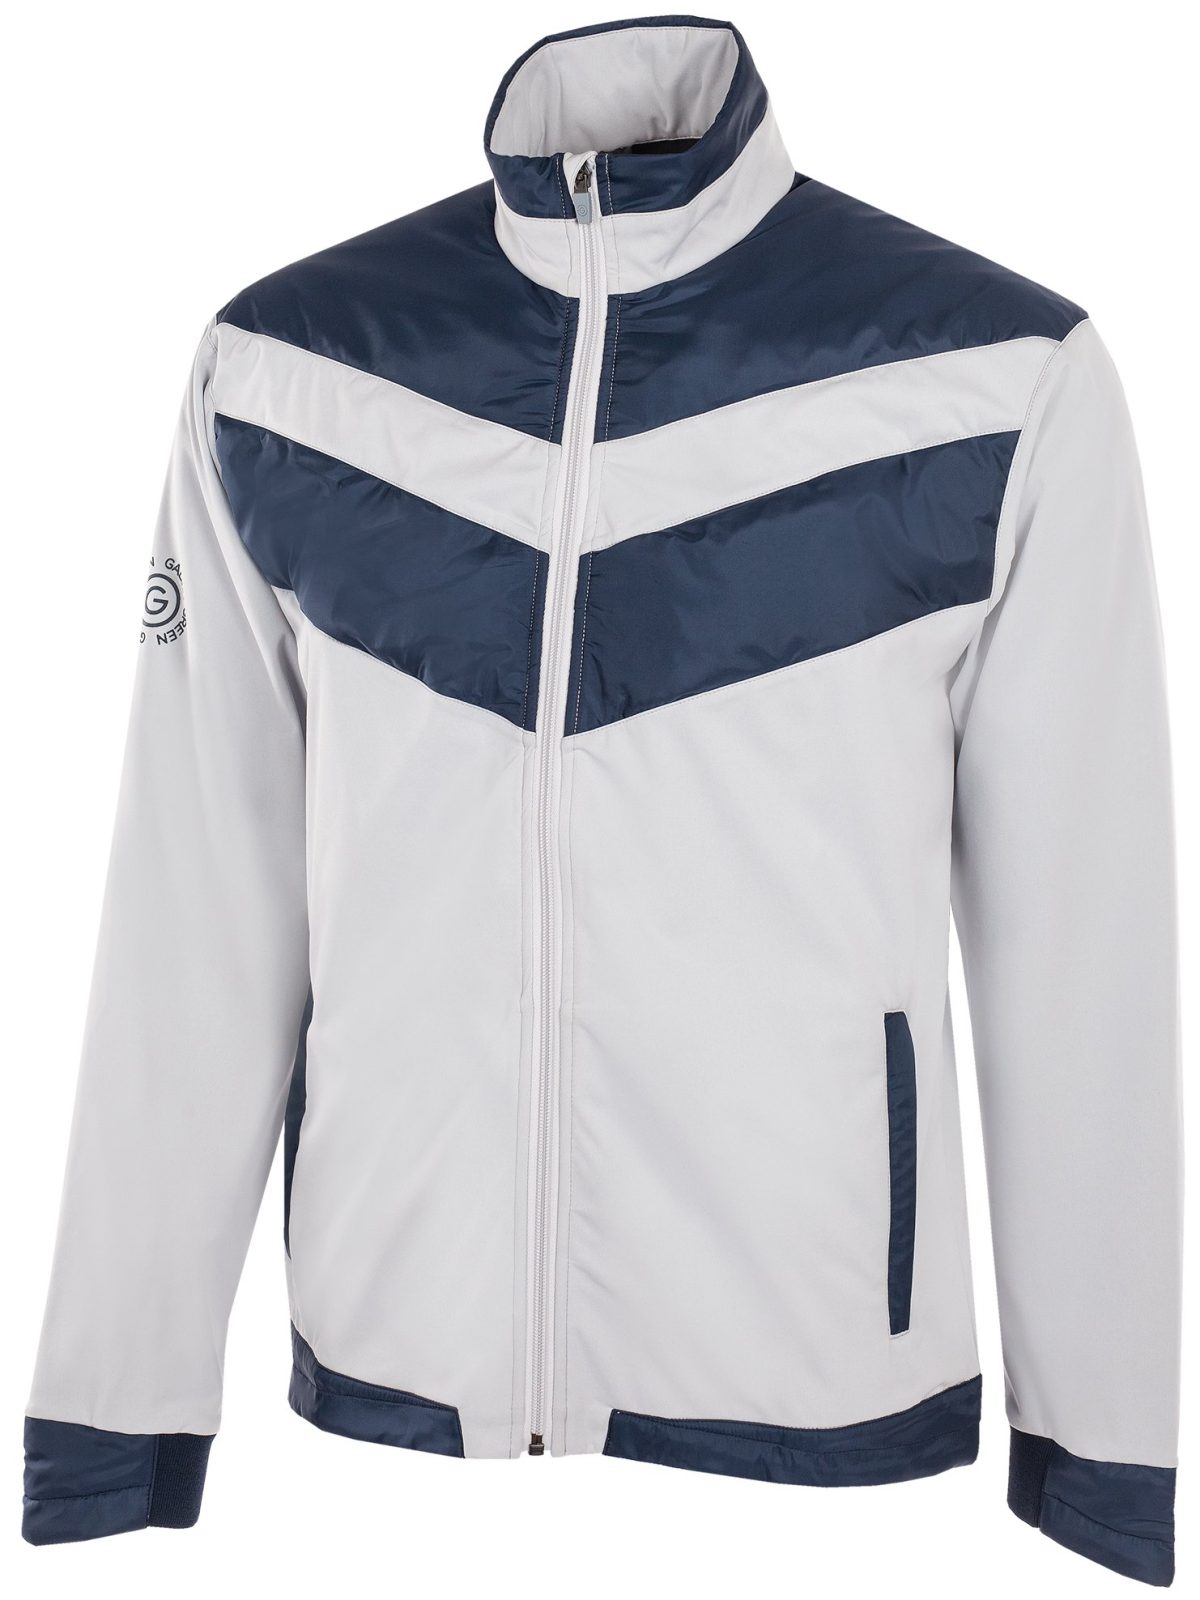 Galvin Green Men's Liam Golf Jacket in Cool Grey/Navy, Size S